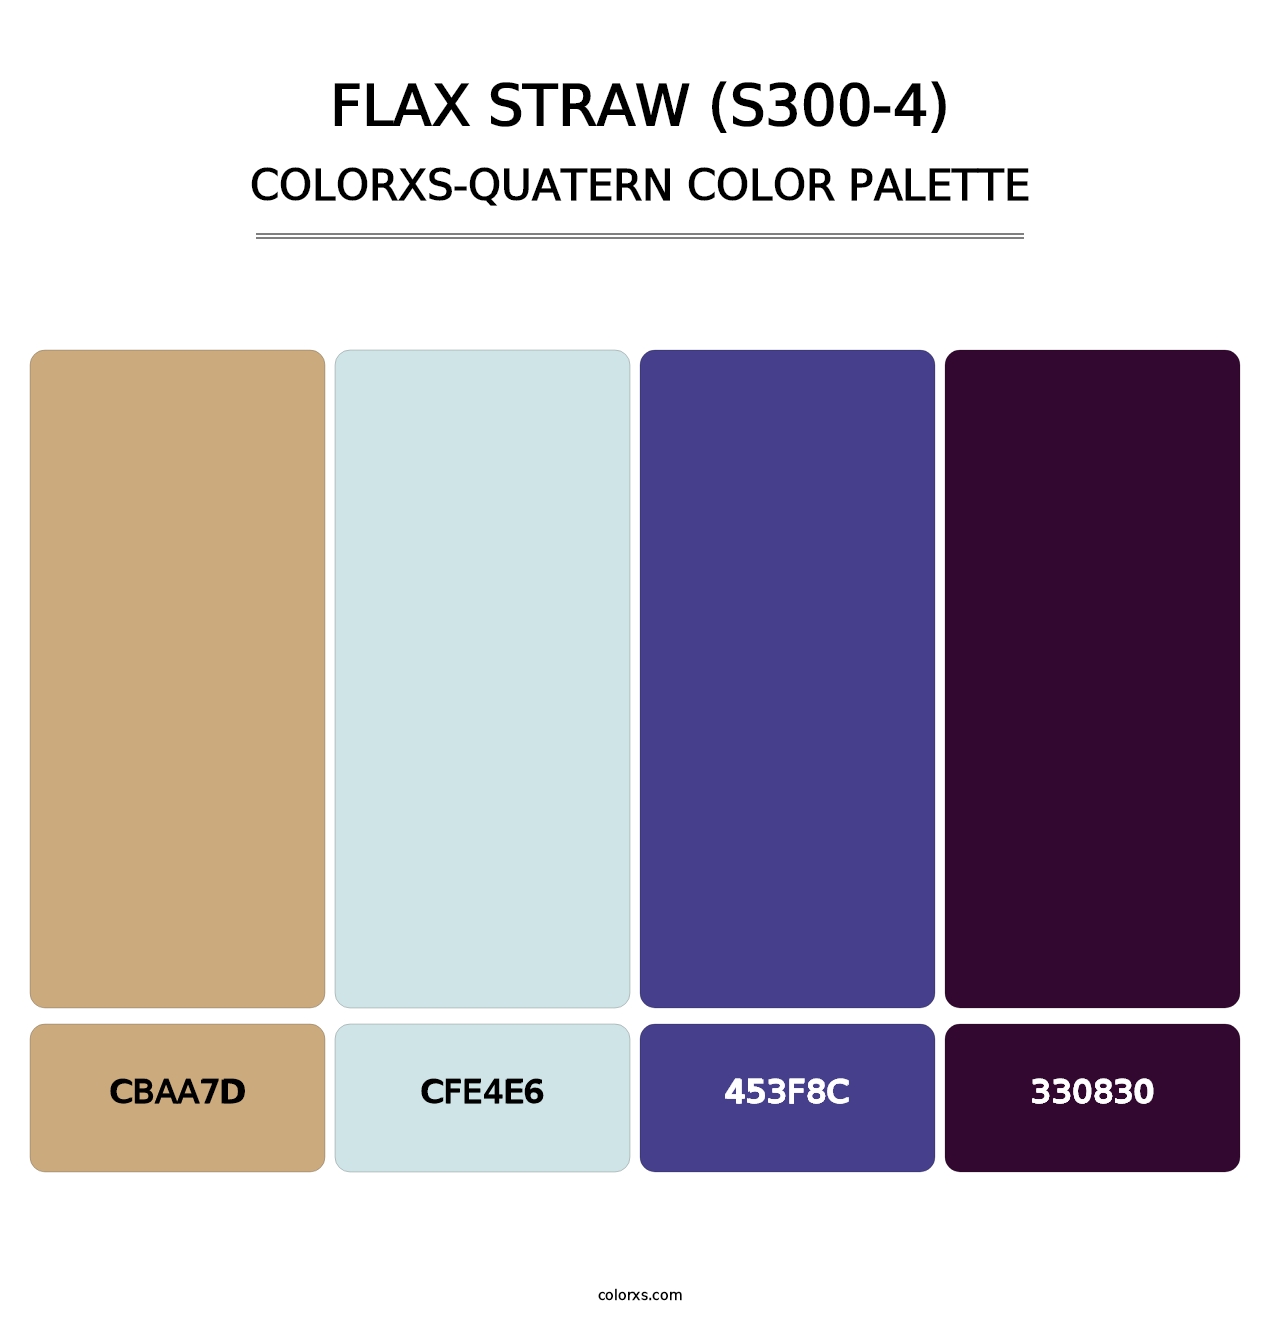 Flax Straw (S300-4) - Colorxs Quatern Palette